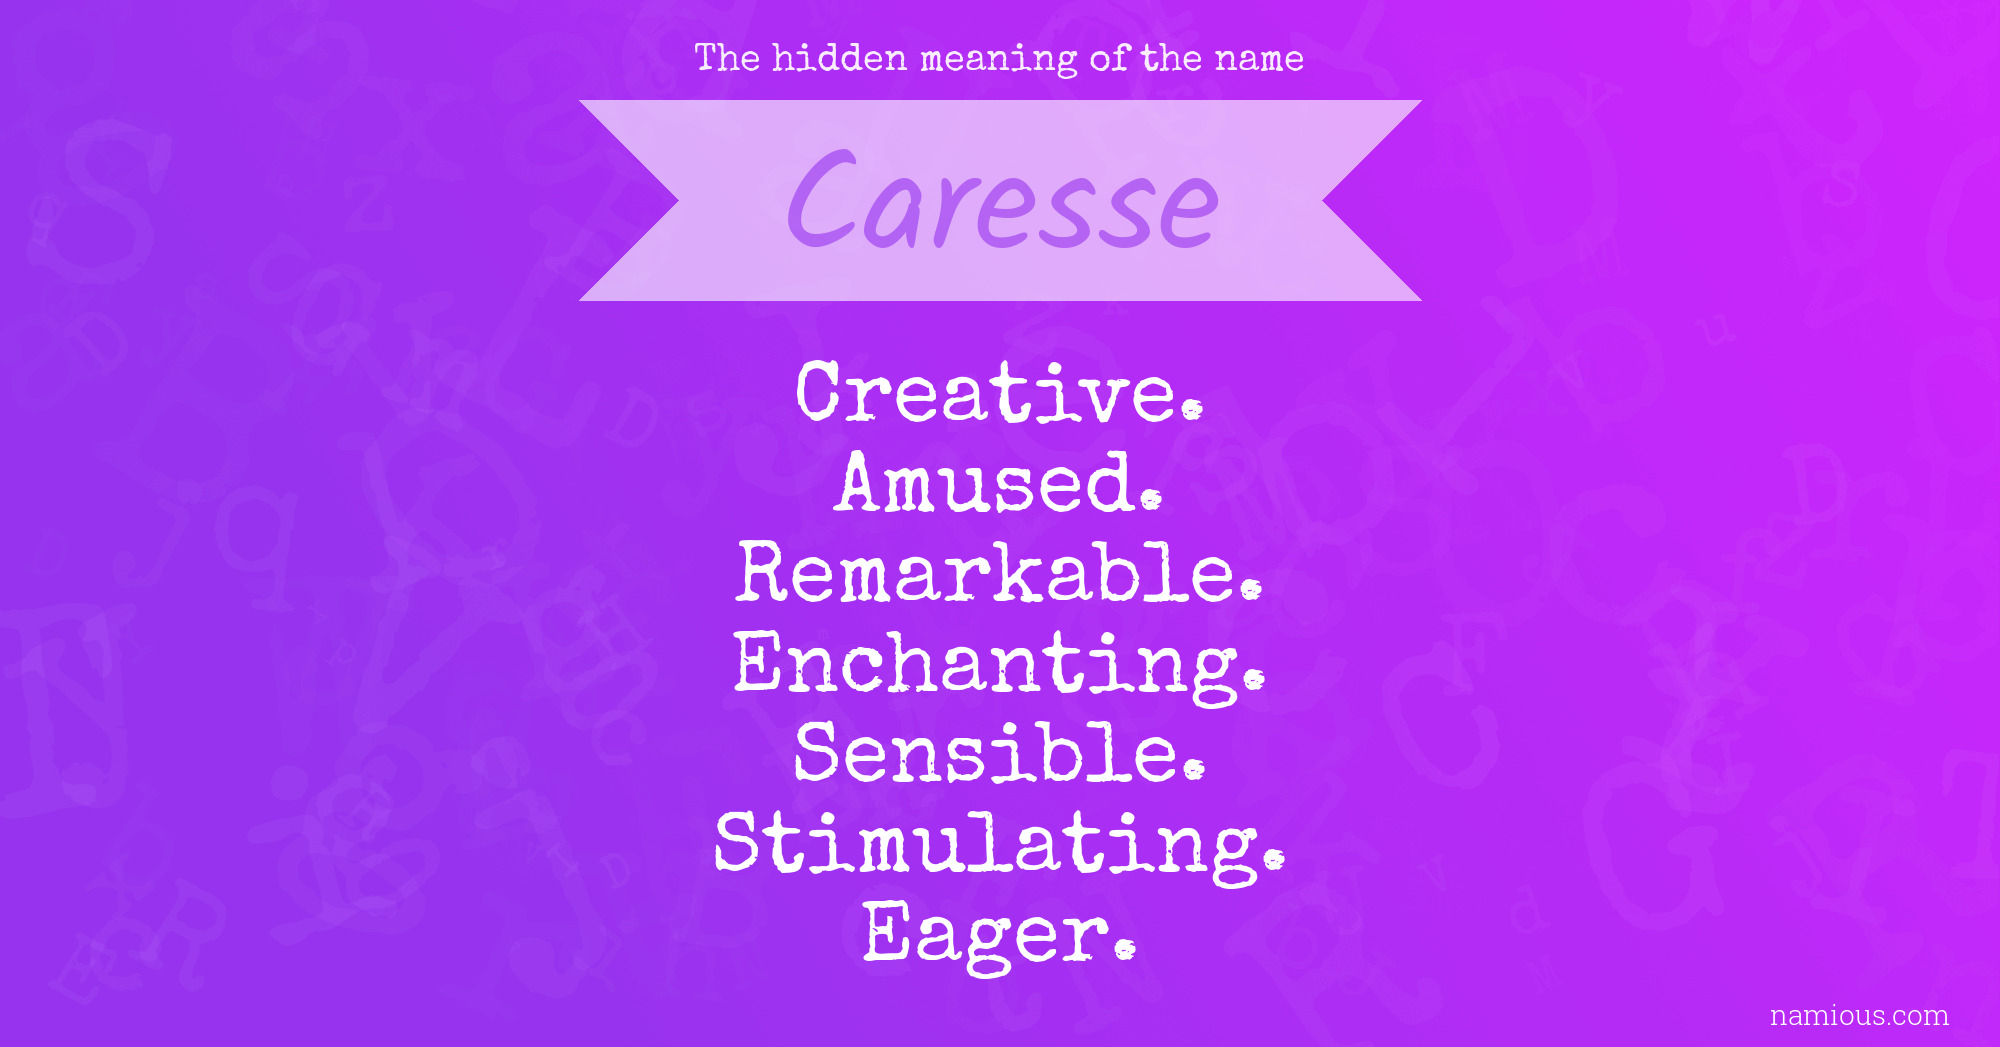 The hidden meaning of the name Caresse